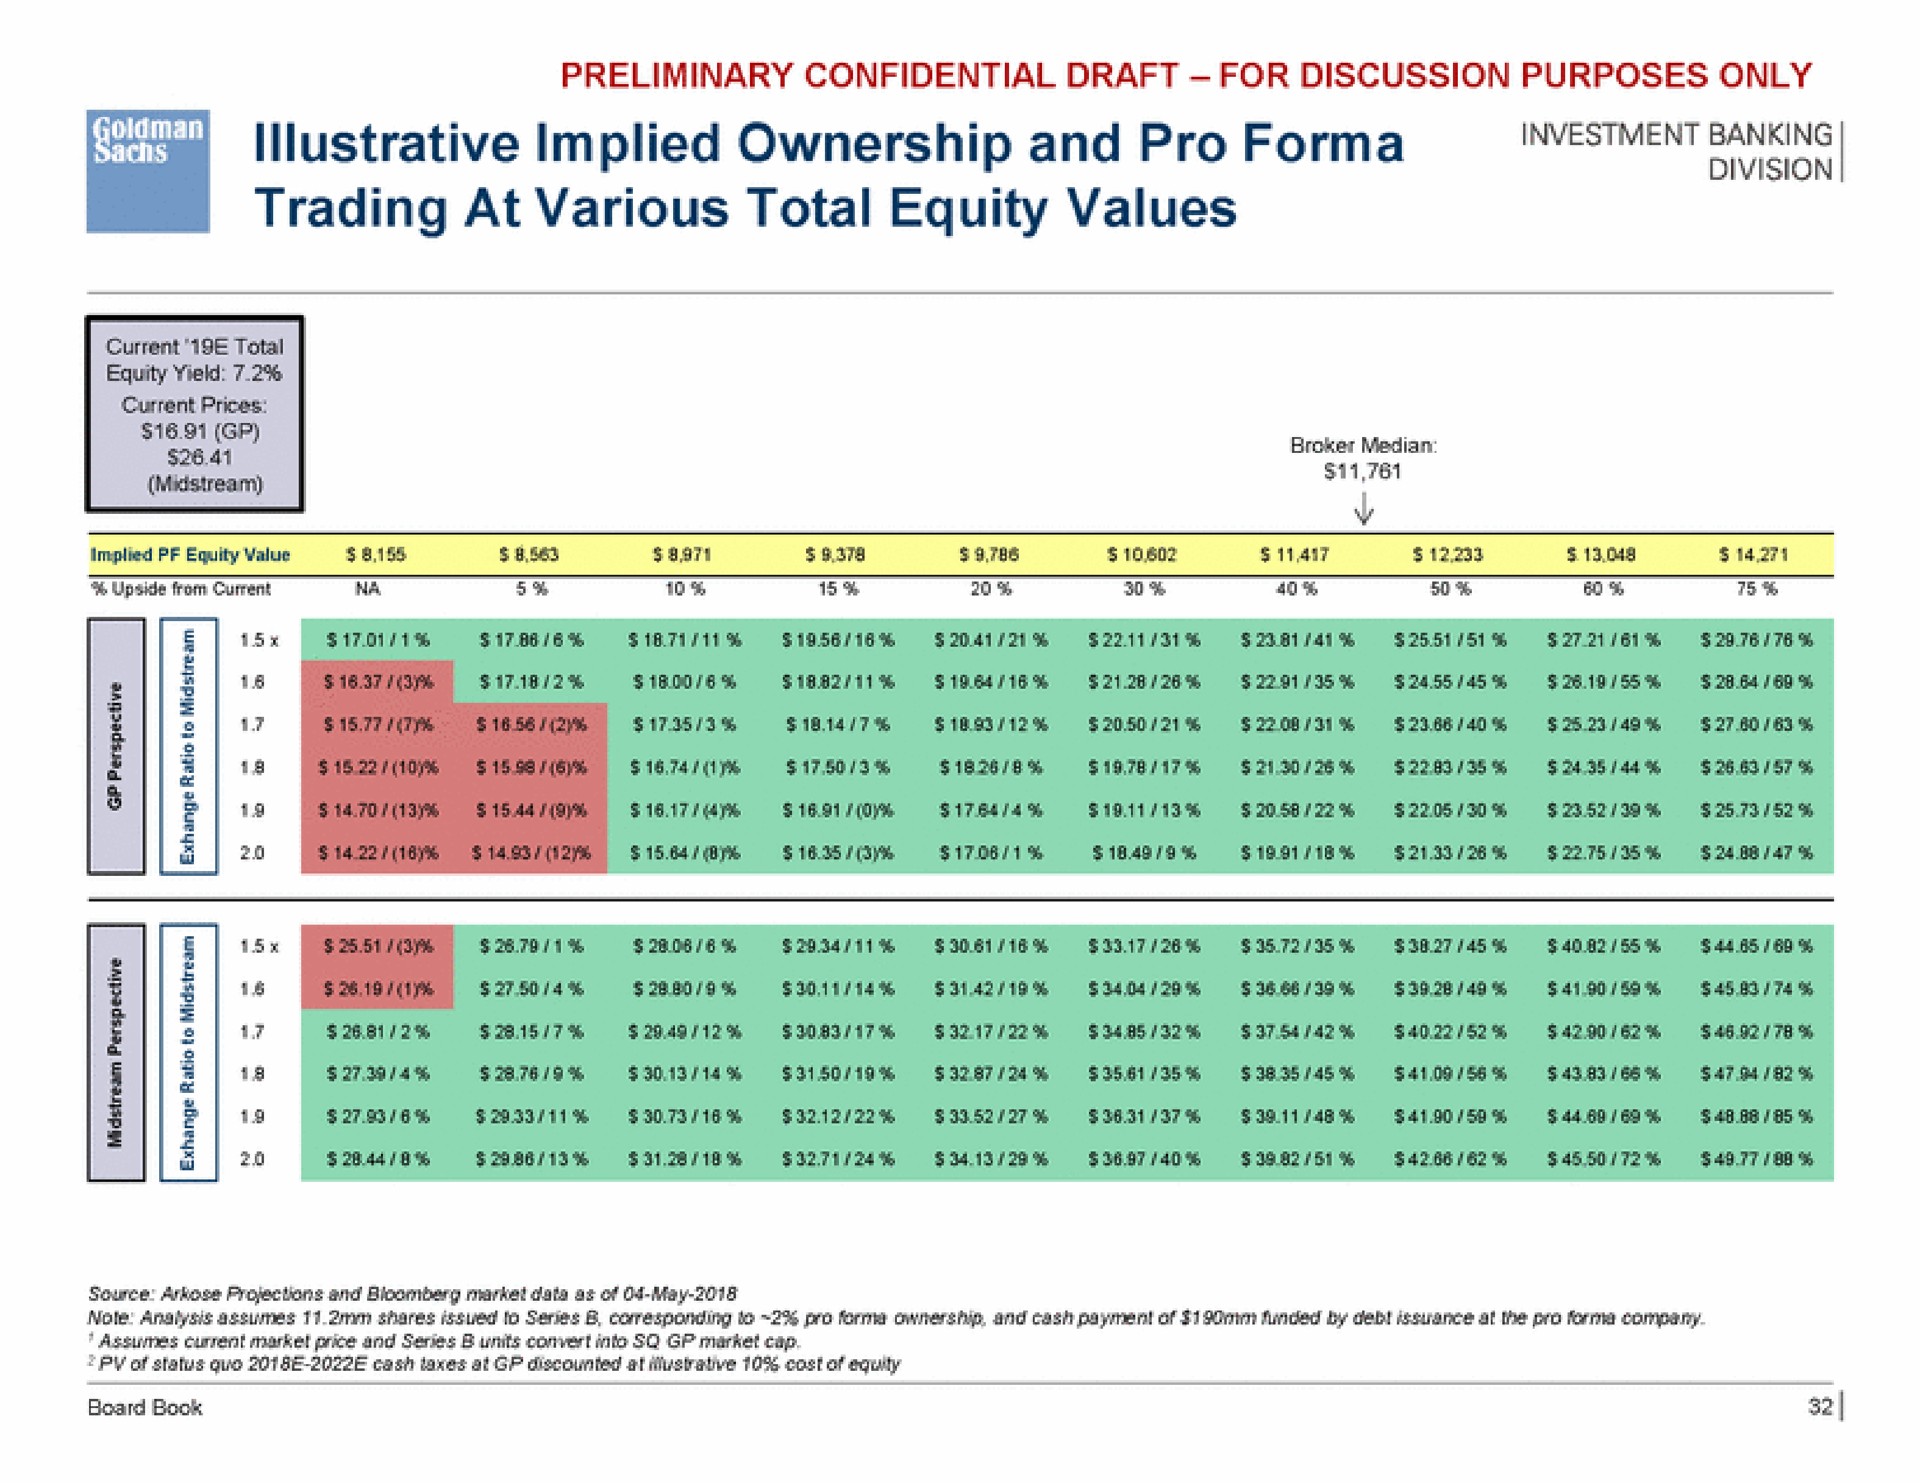 vision illustrative implied ownership and pro trading at various total equity values | Goldman Sachs